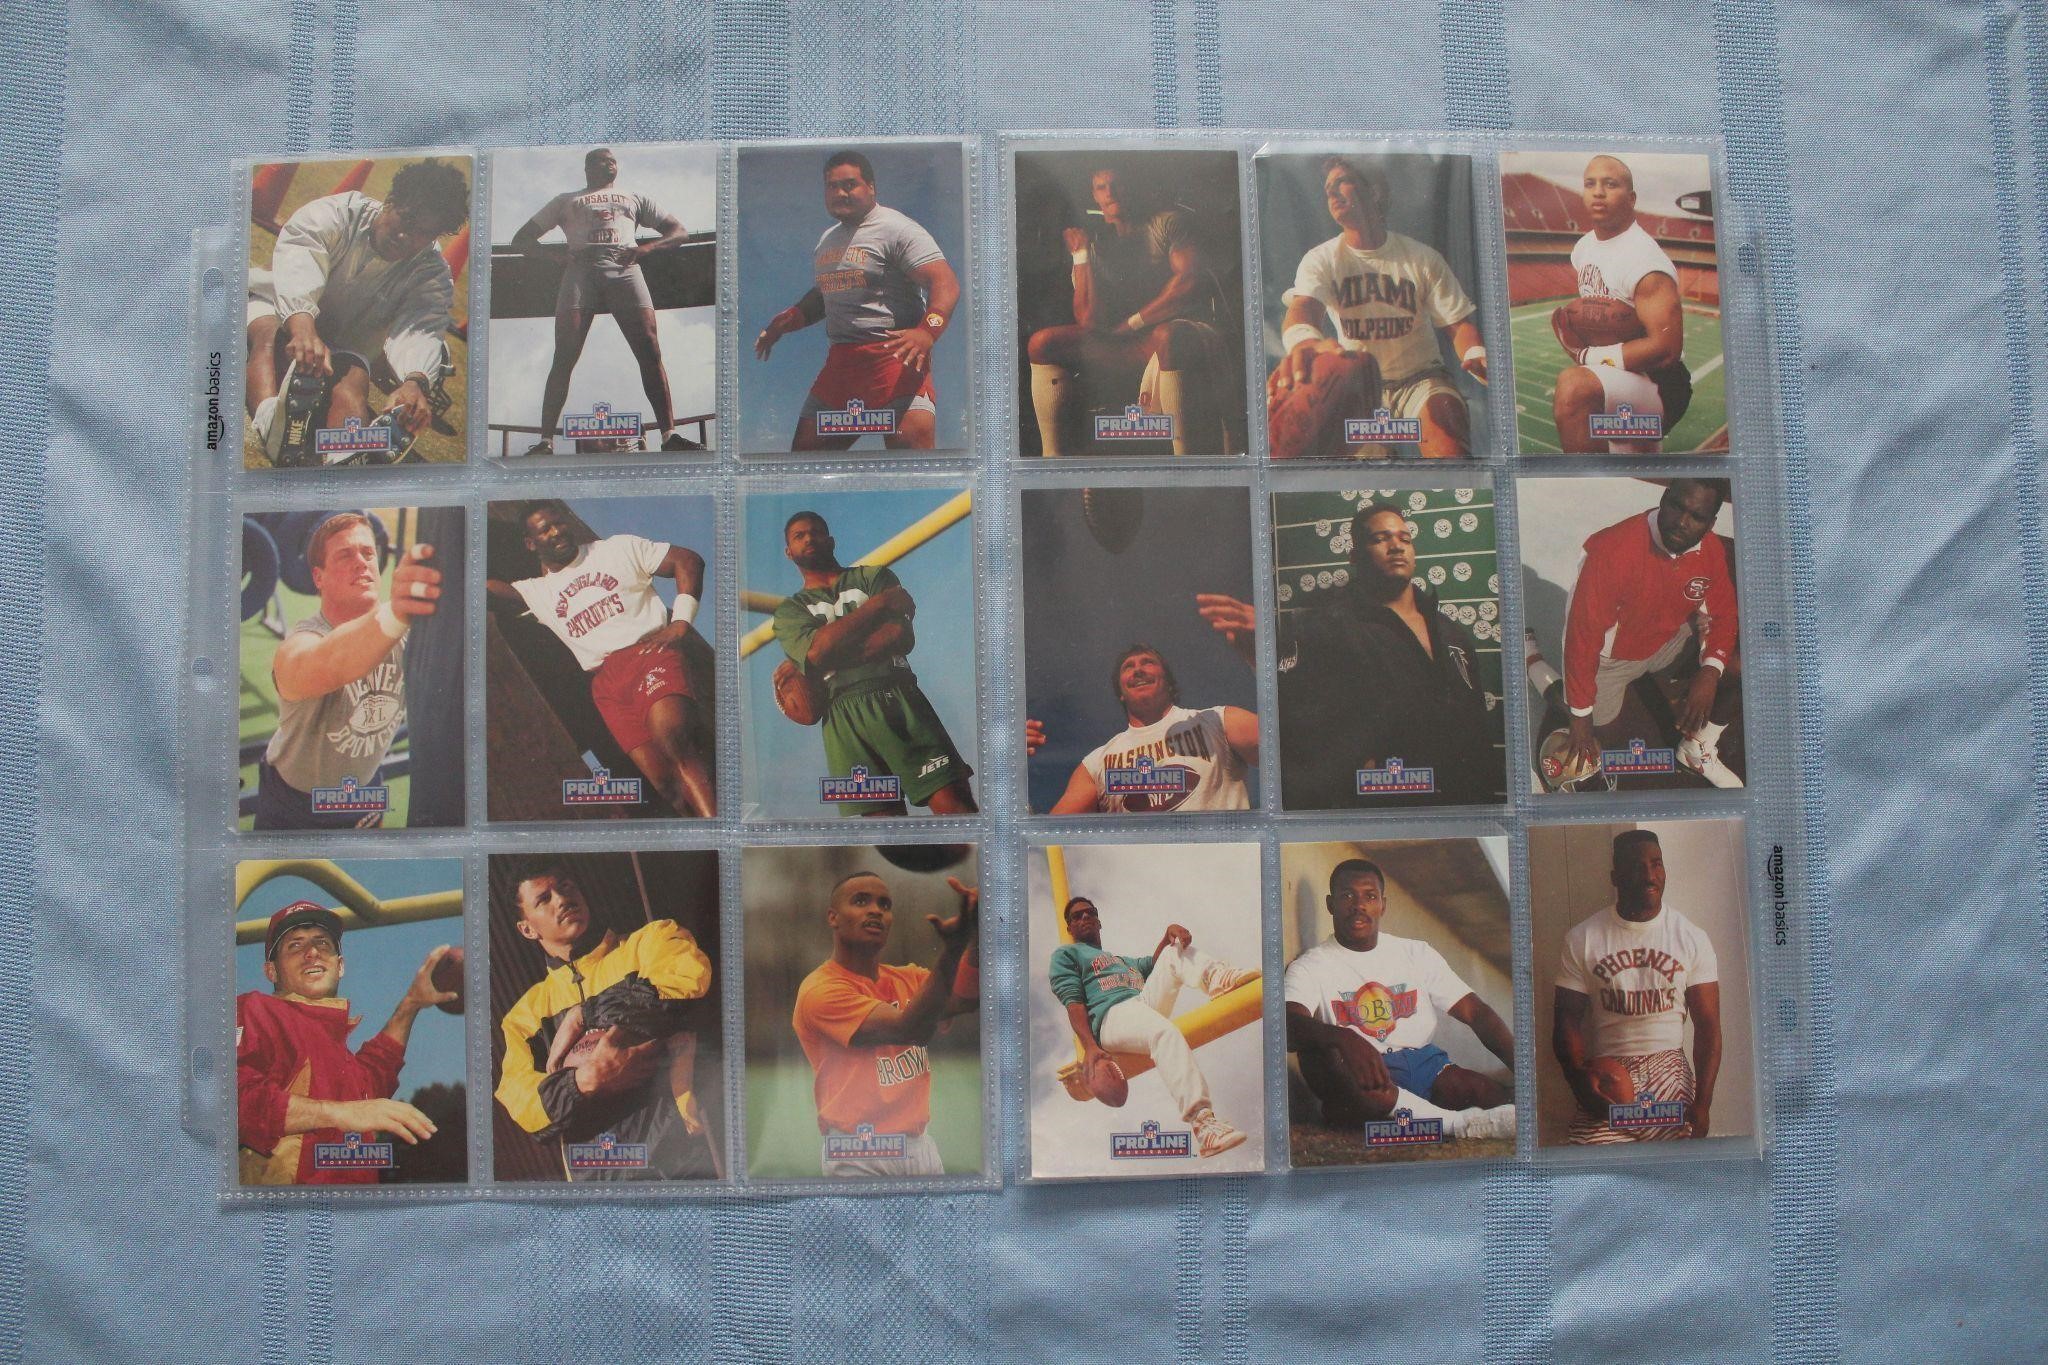 18 Assorted NFL Football Collector Cards